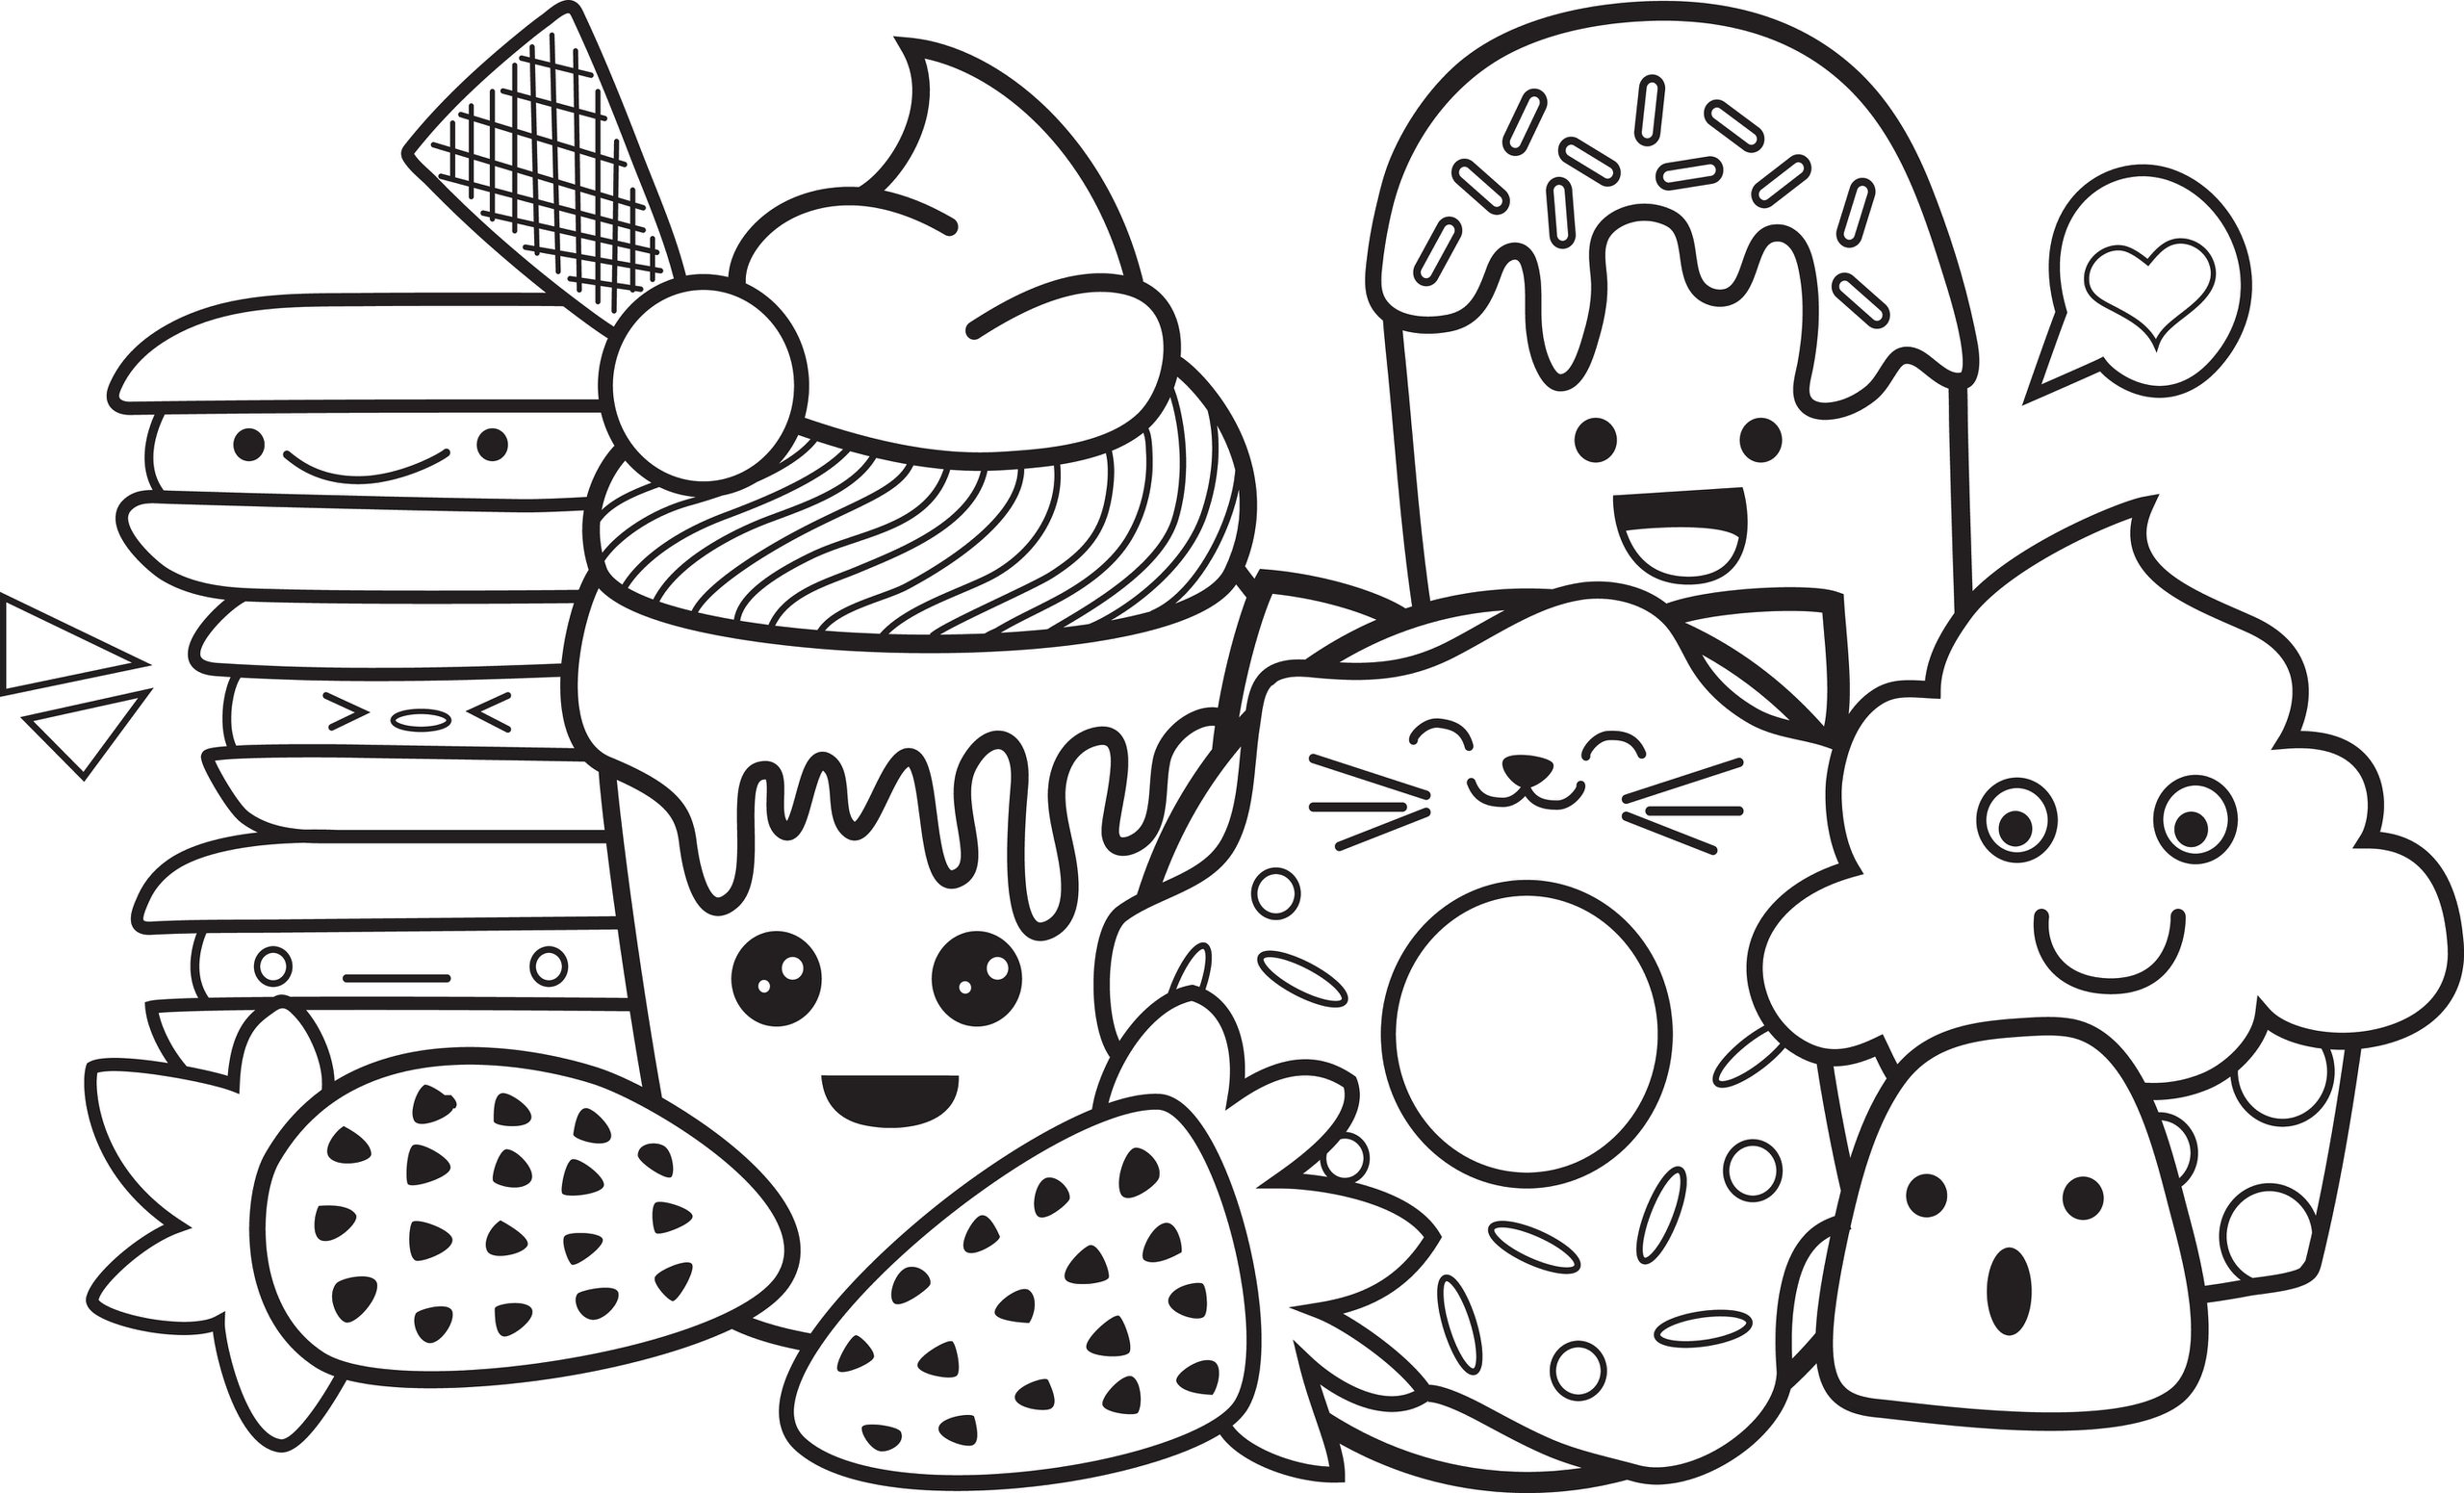 Pieces Of Candy Coloring Pages   Coloring Home